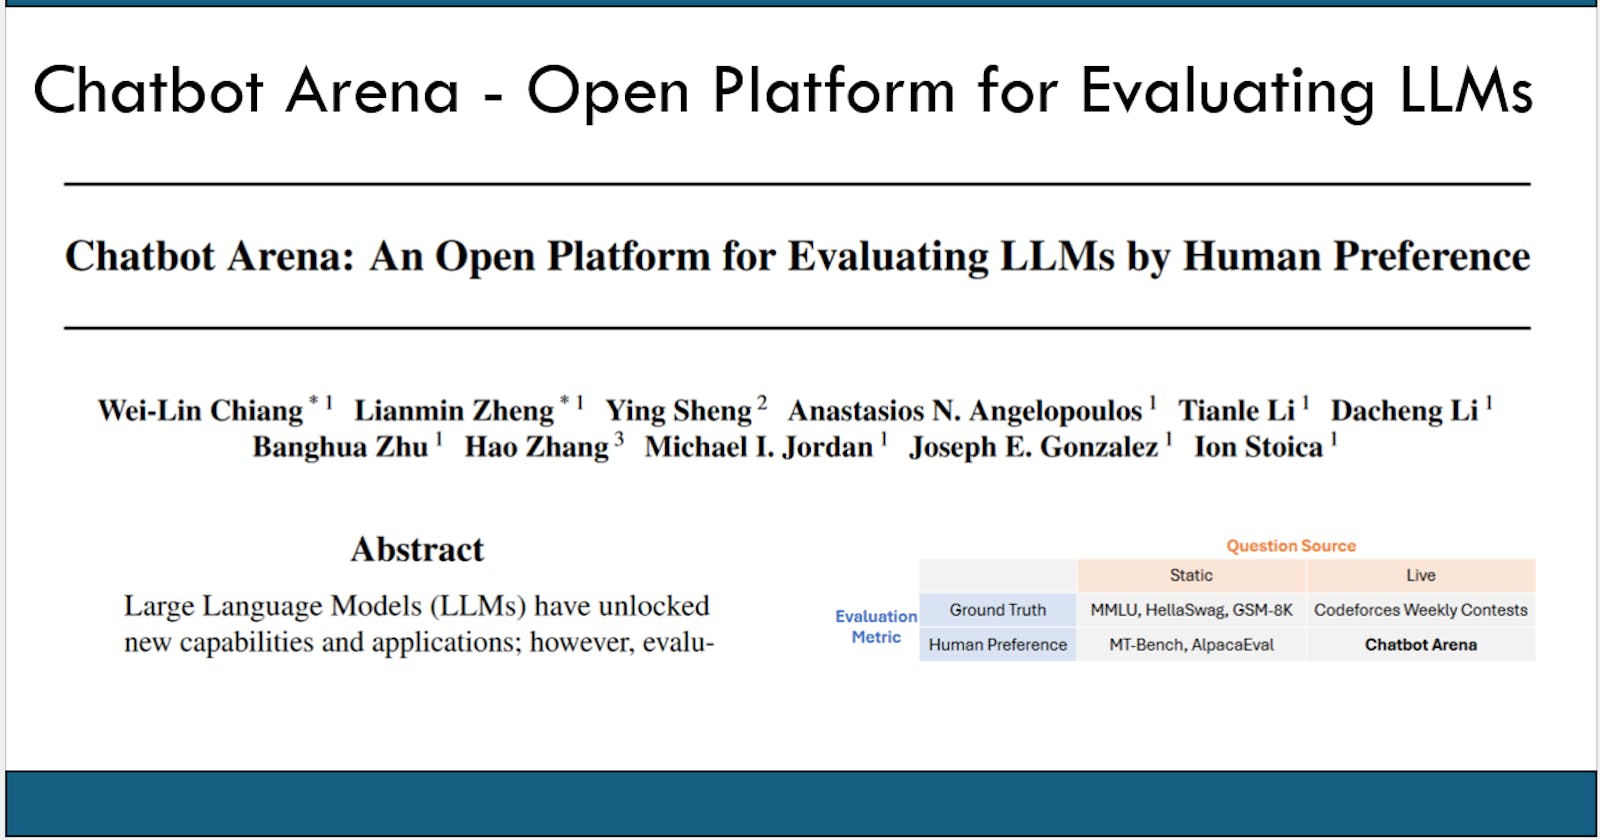 Chatbot Arena: An Open Platform for Evaluating LLMs by Human Preference